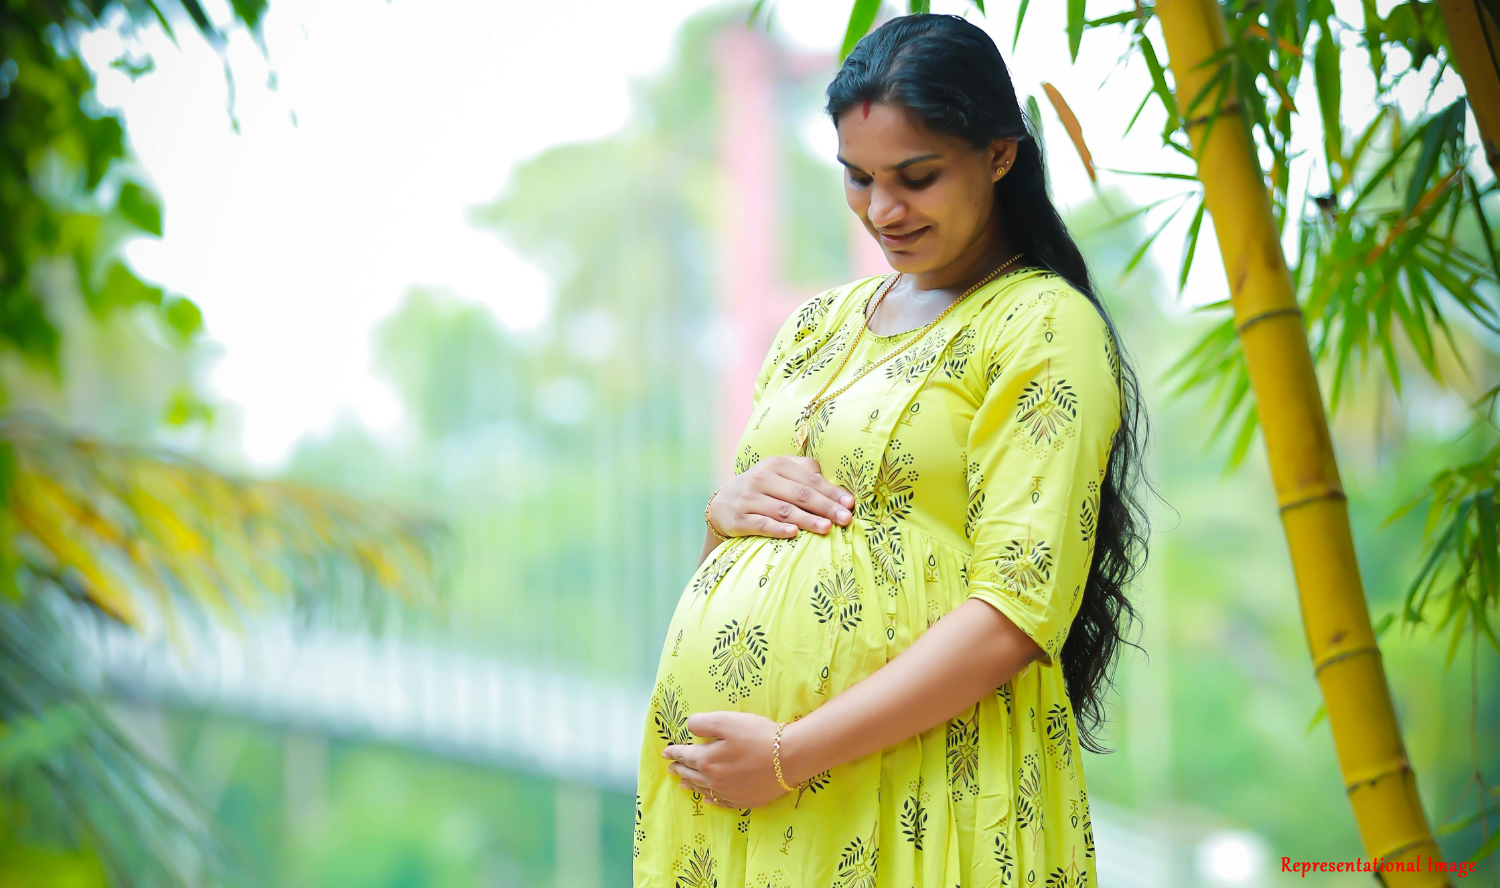 Make in India – A First for Pregnancy in India